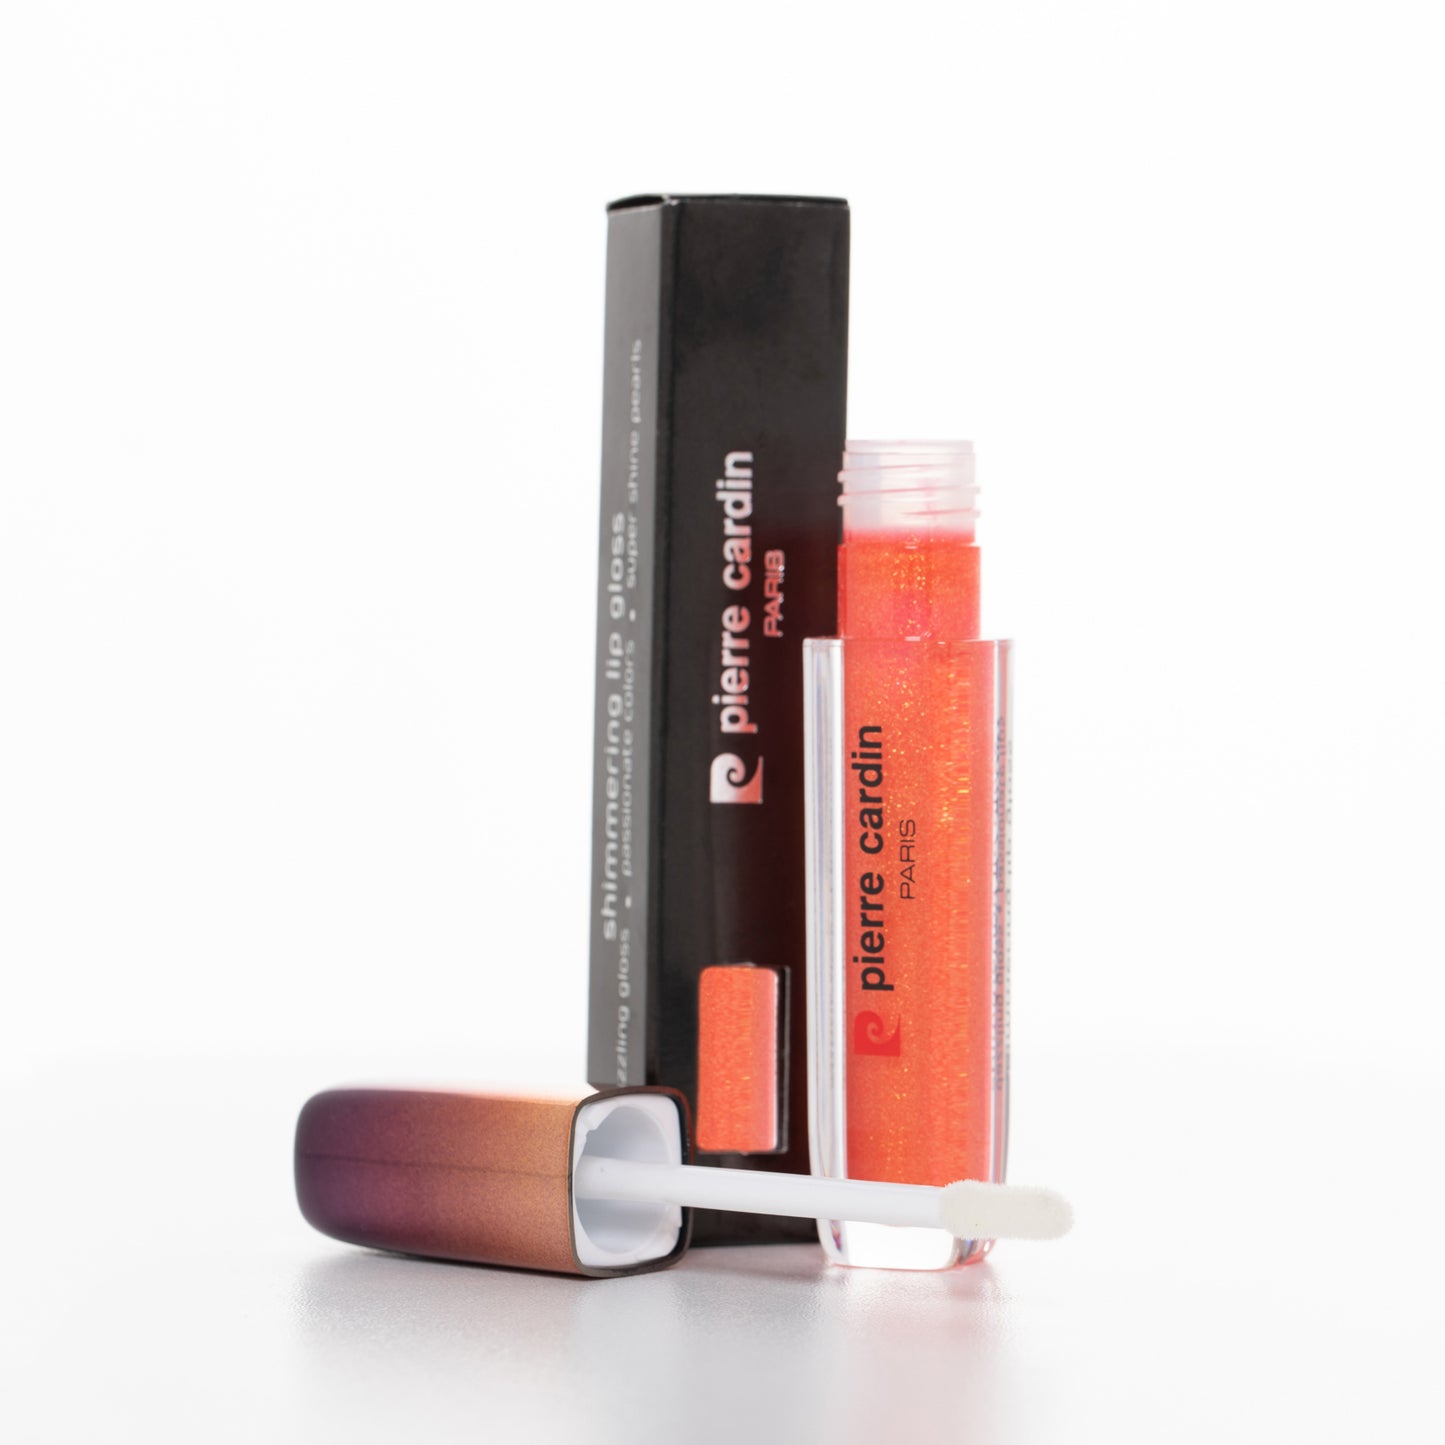 Pierre Cardin Shimmering Lipgloss Coral Gold  804 - 5 ml